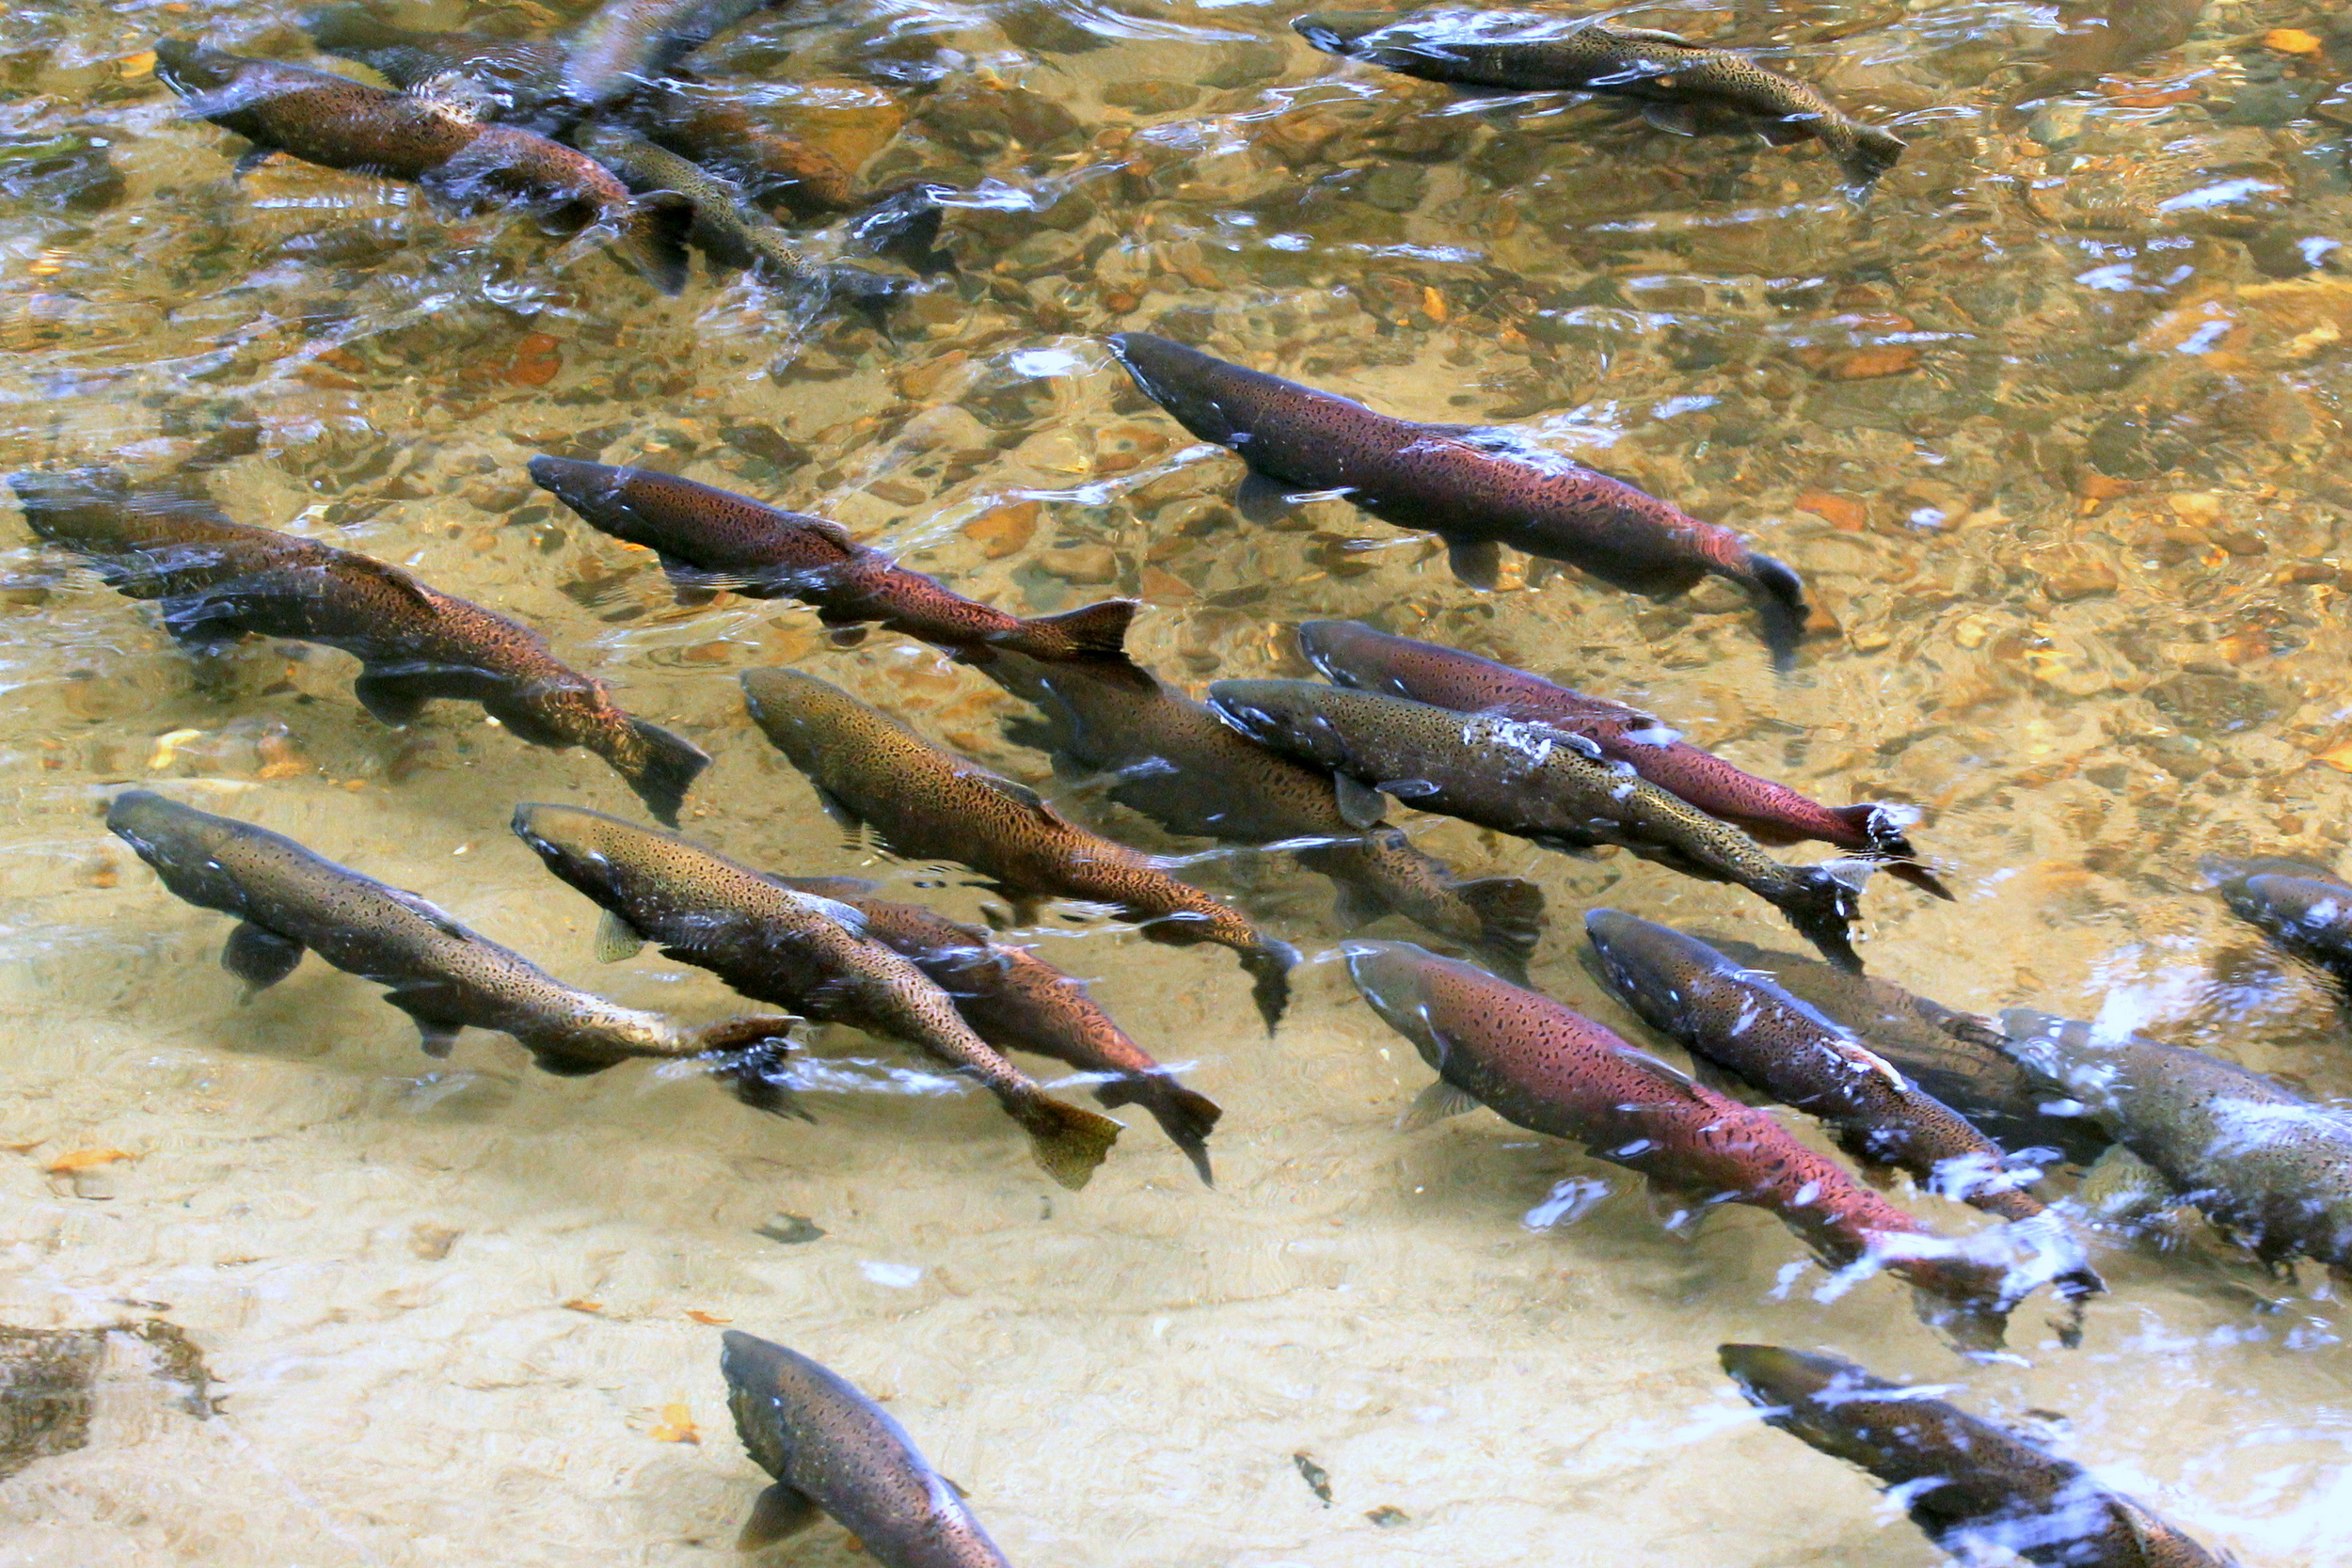 washington based conservation group files petition for king salmon endangered species protections